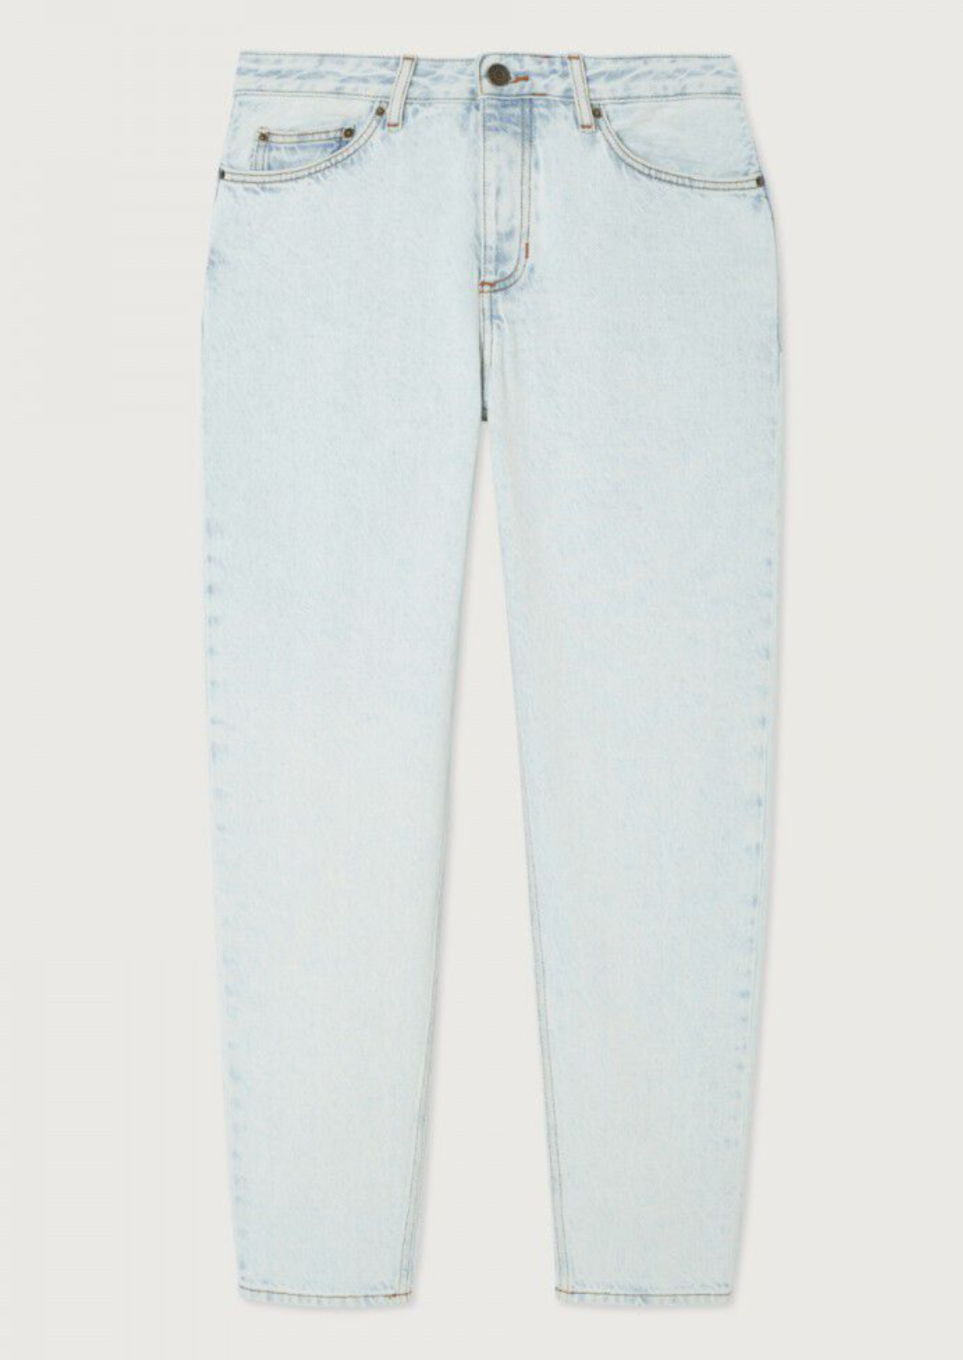 A flat lay image of the Joybird Carrot Jeans in Winter Bleached